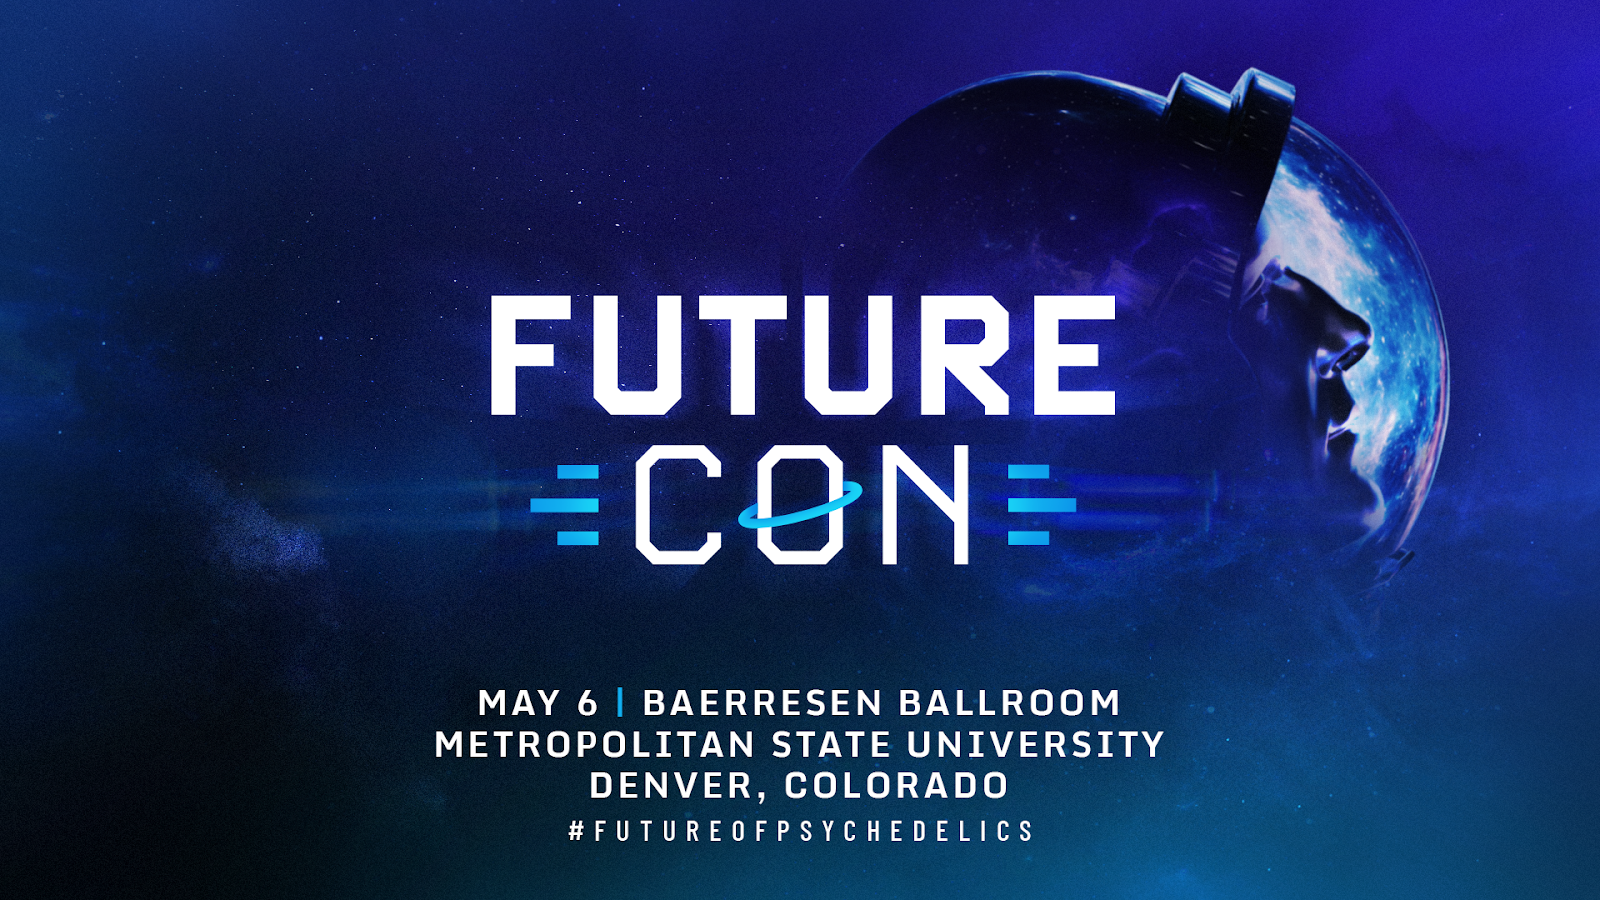 Metropolitan State University is proud to present FutureCon, a one-day conference that delves into the multifaceted medical, business, and policy issues surrounding controlled substances.